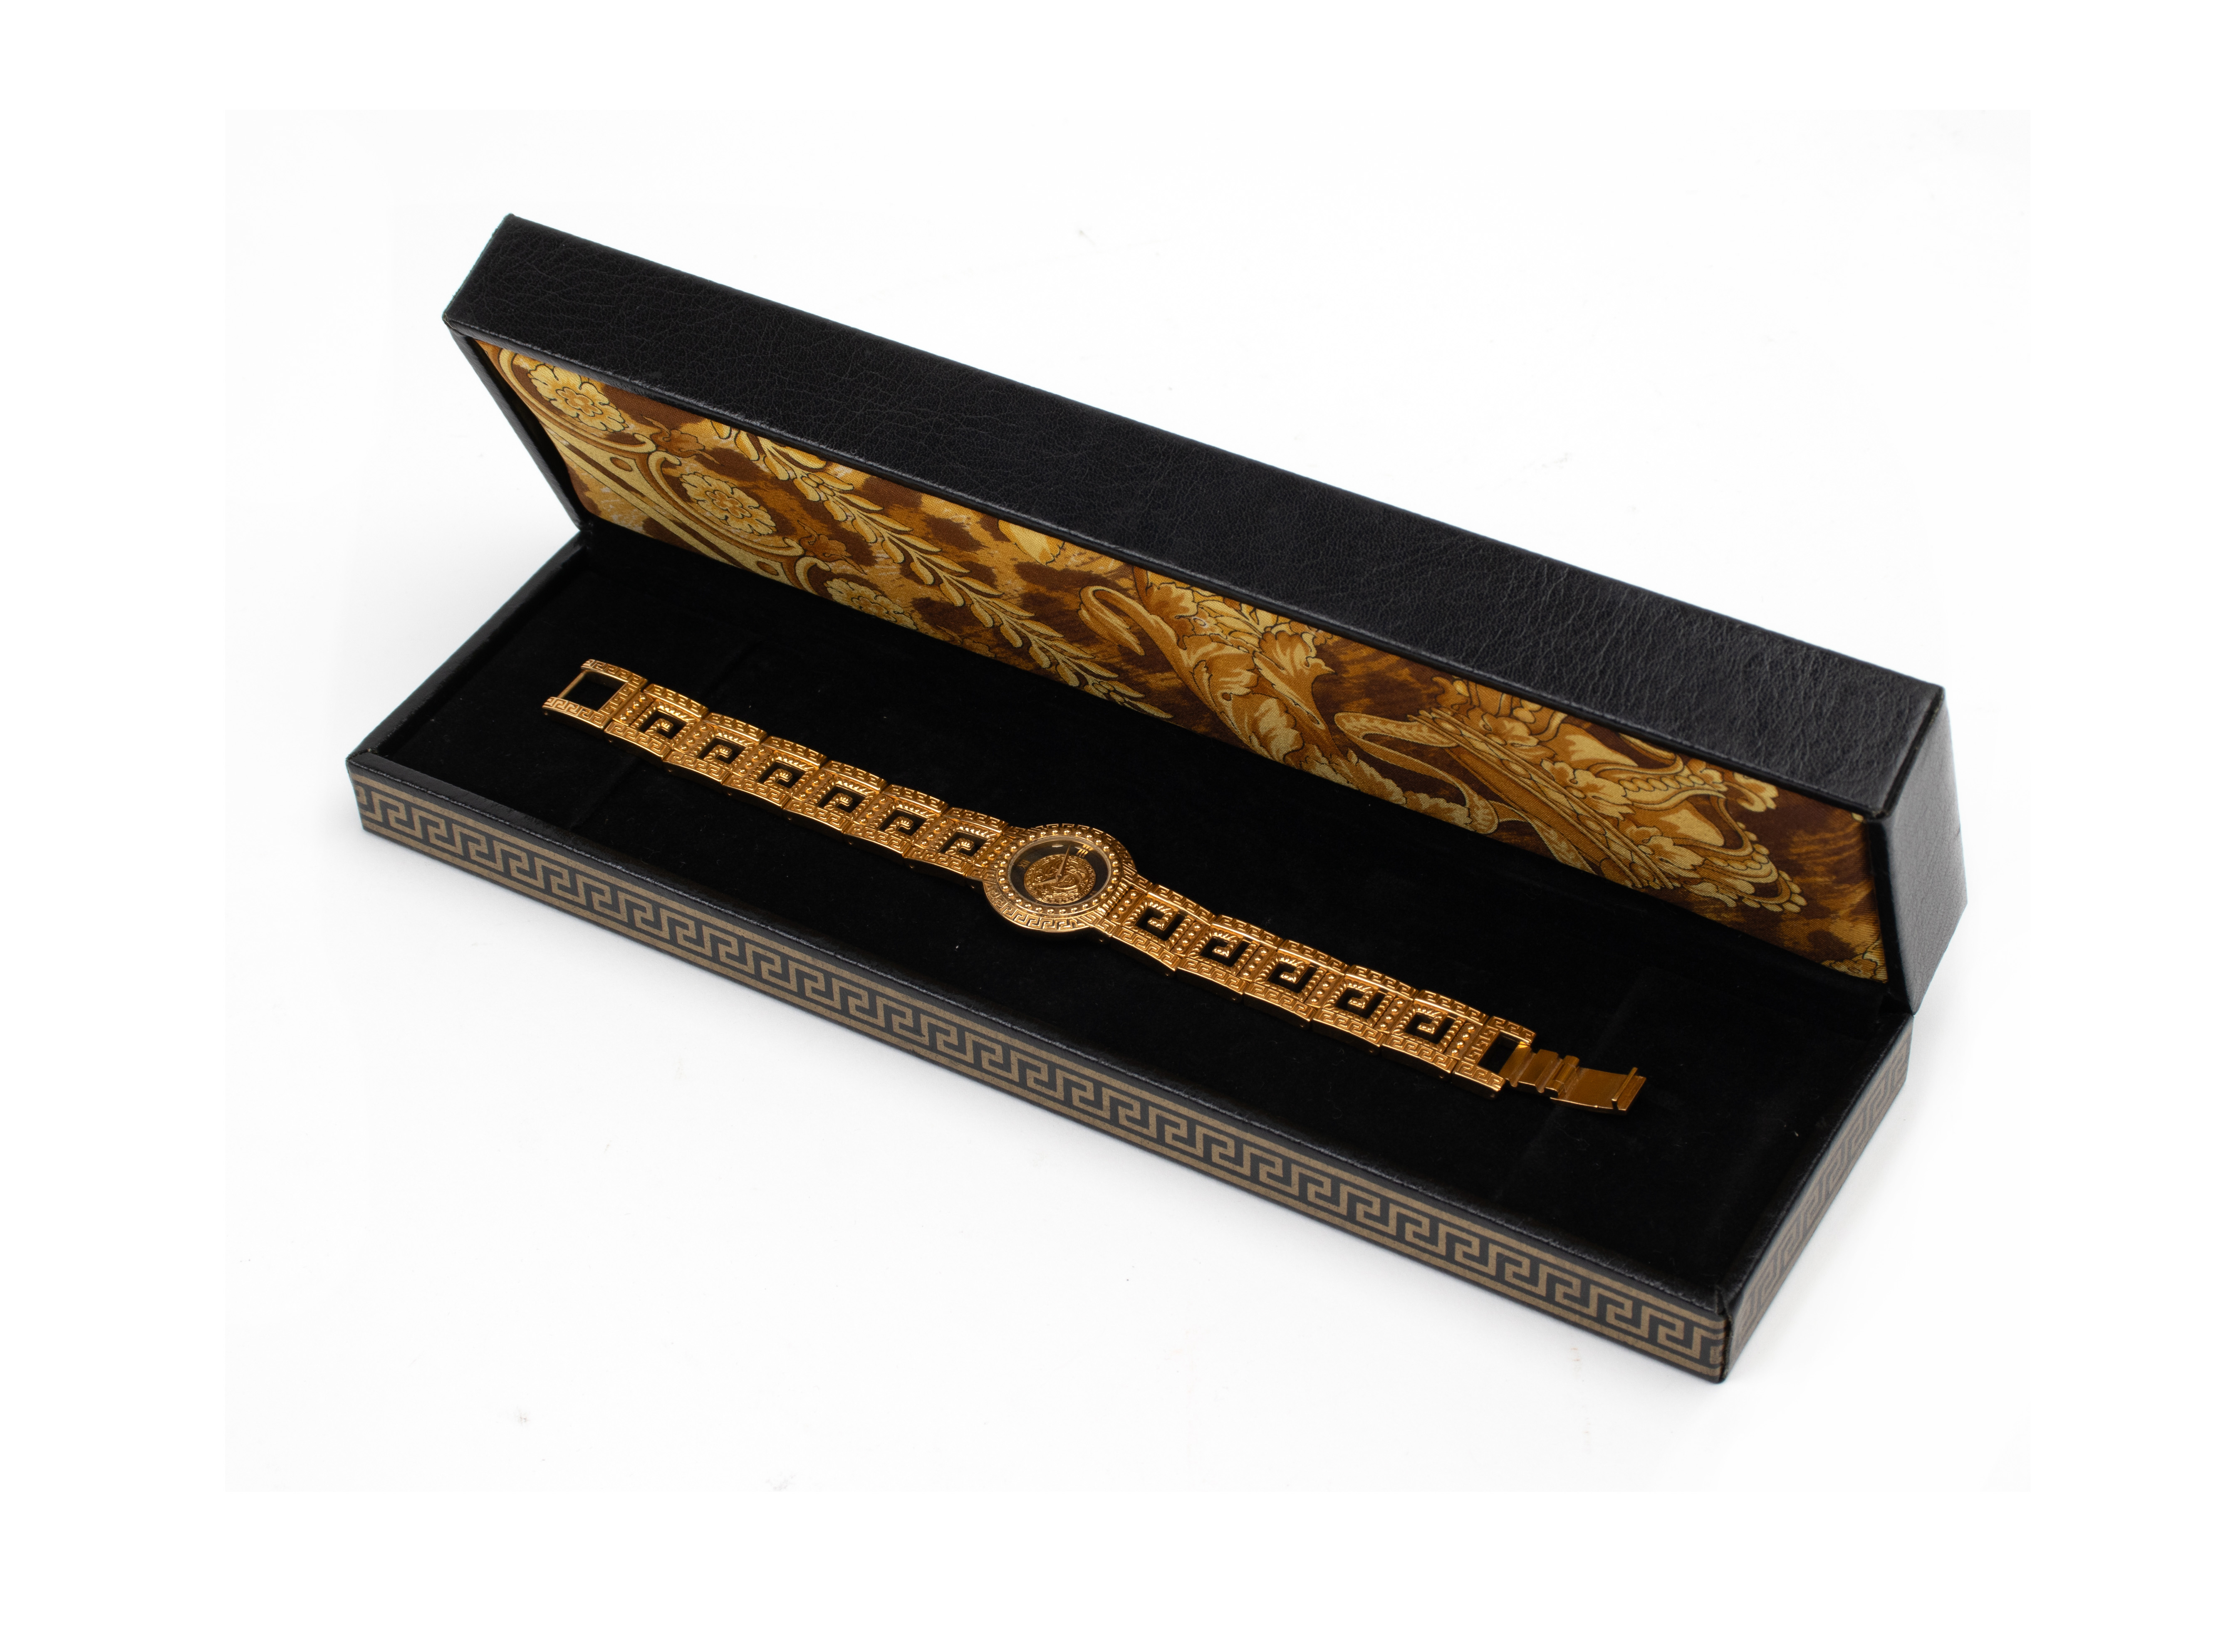 A GIANNI VERSACE SIGNATURE GOLD PLATED BRACELET WATCH - Image 5 of 5